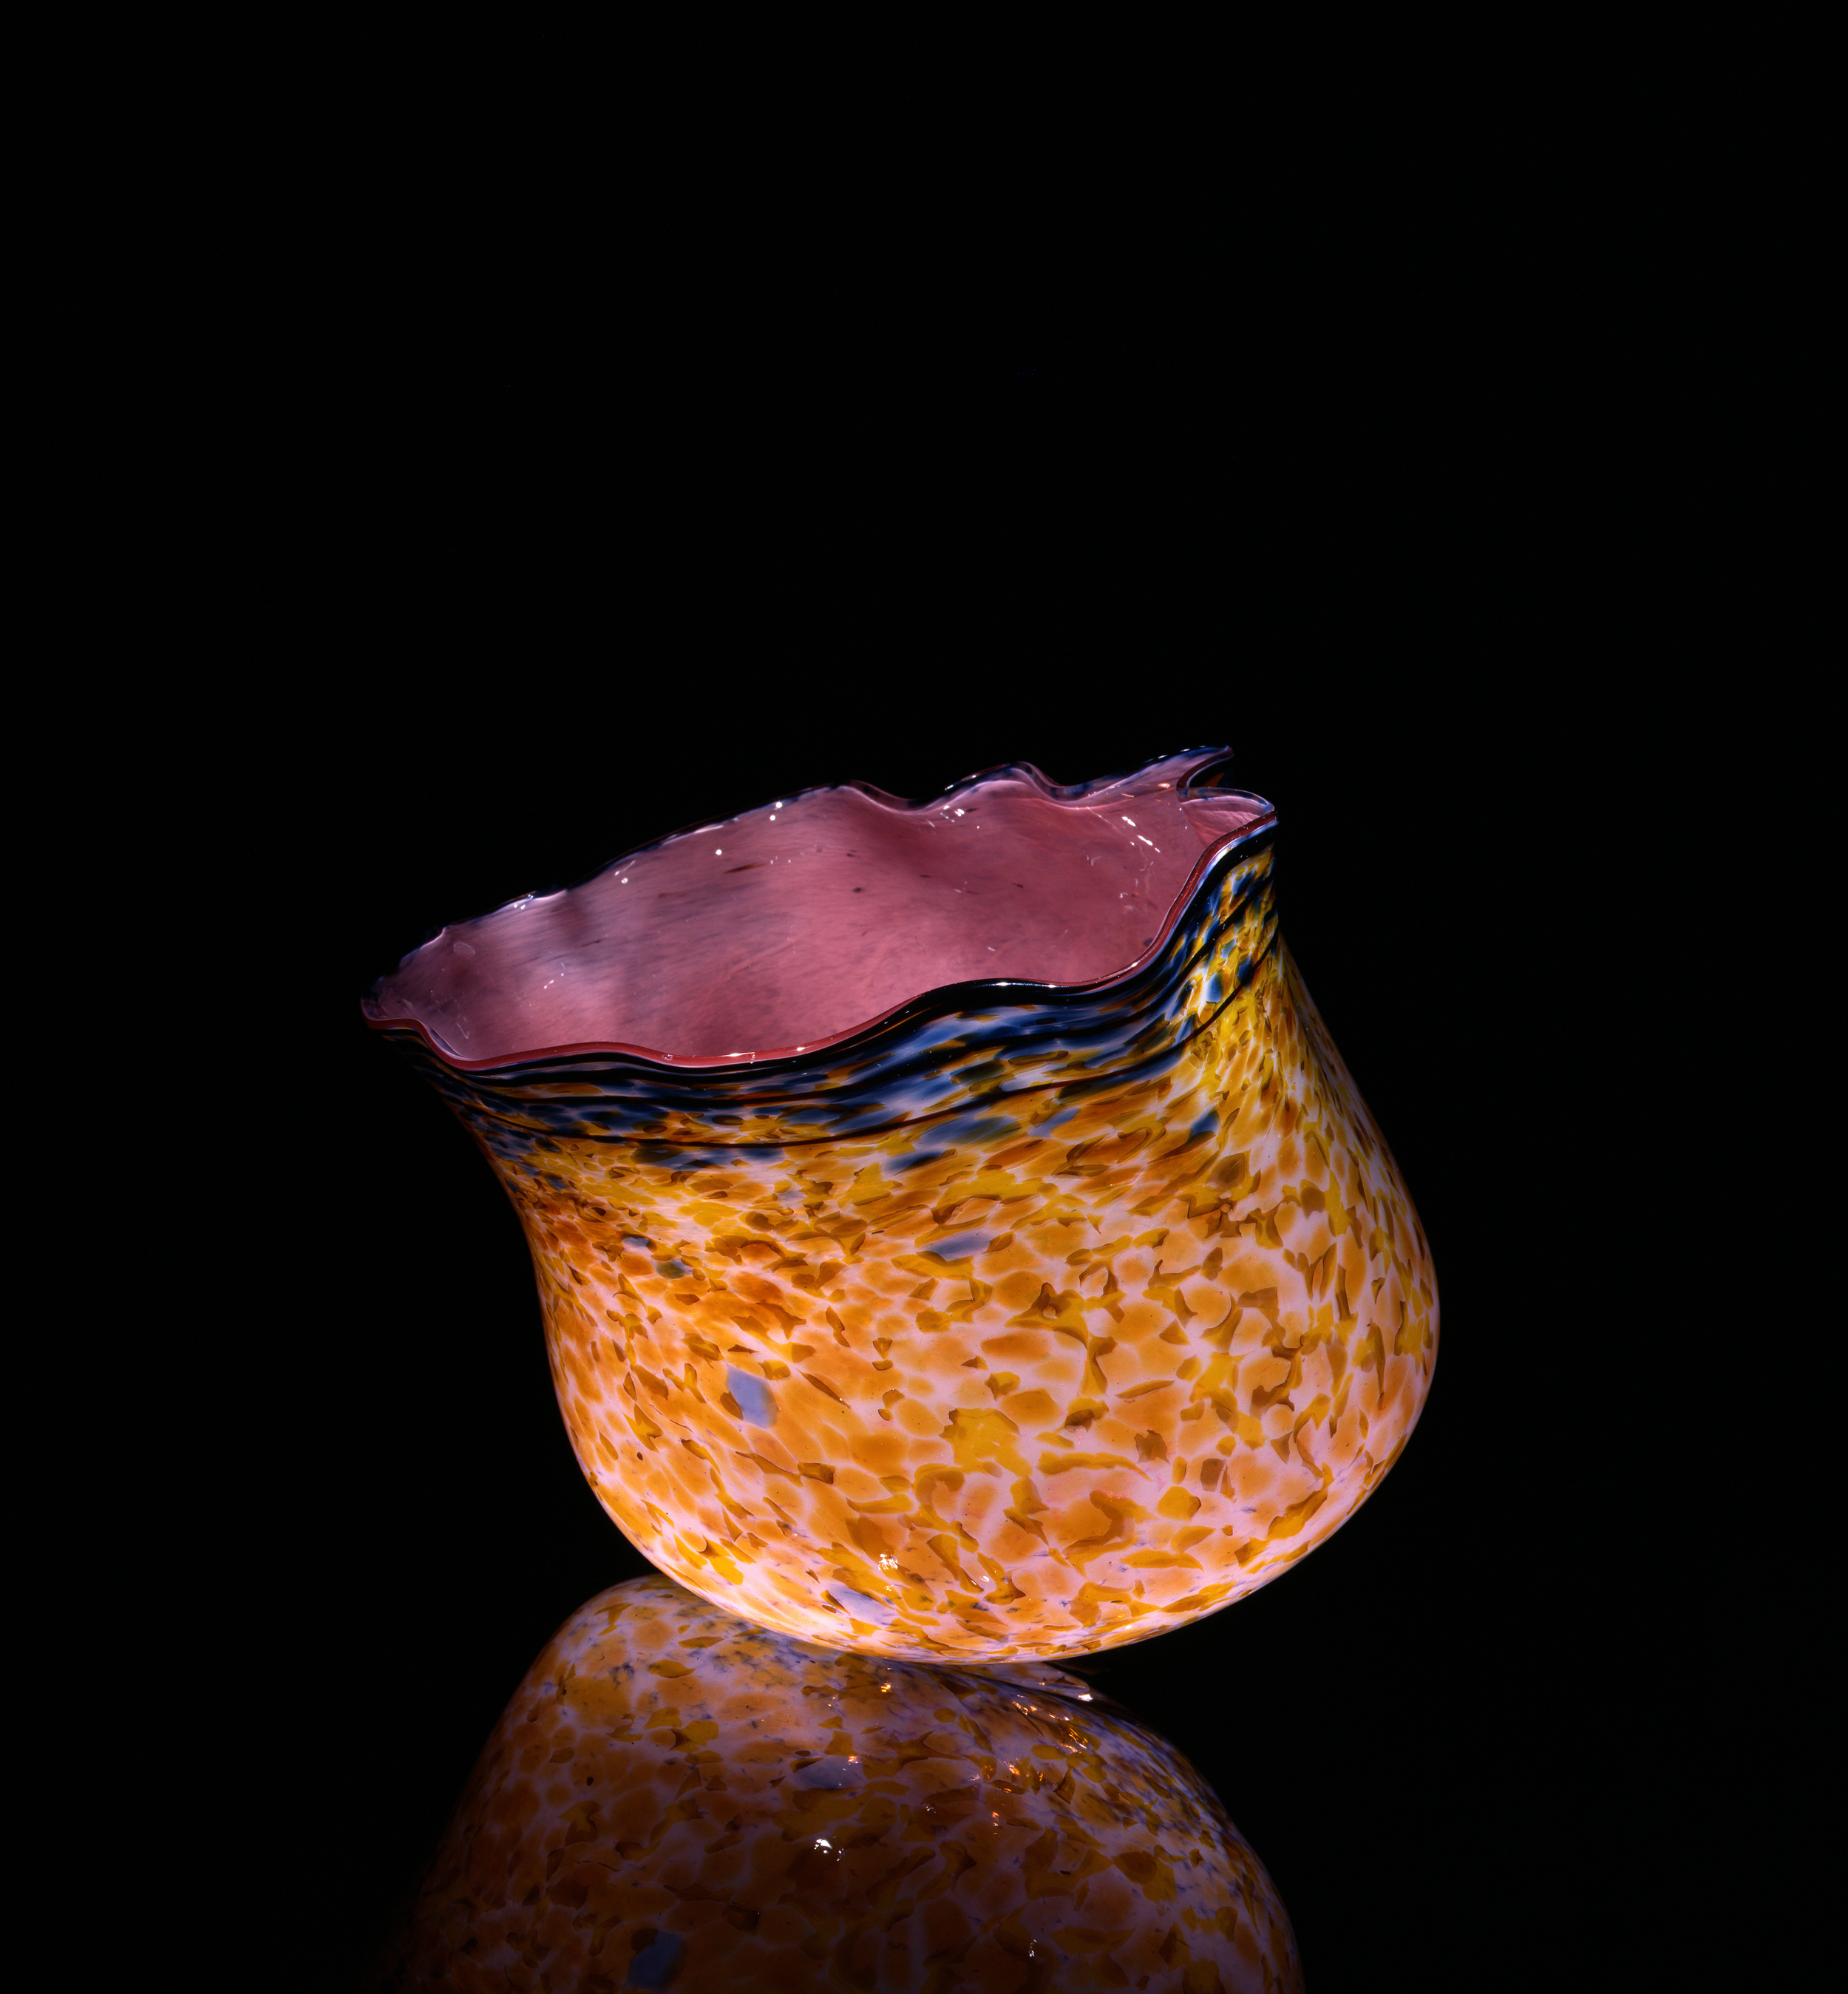  Dale Chihuly,&nbsp; Ambrosia Macchia with Scarlet Lip Wrap&nbsp; (1984, glass, 10 x 14 x 12 inches), DC.132 